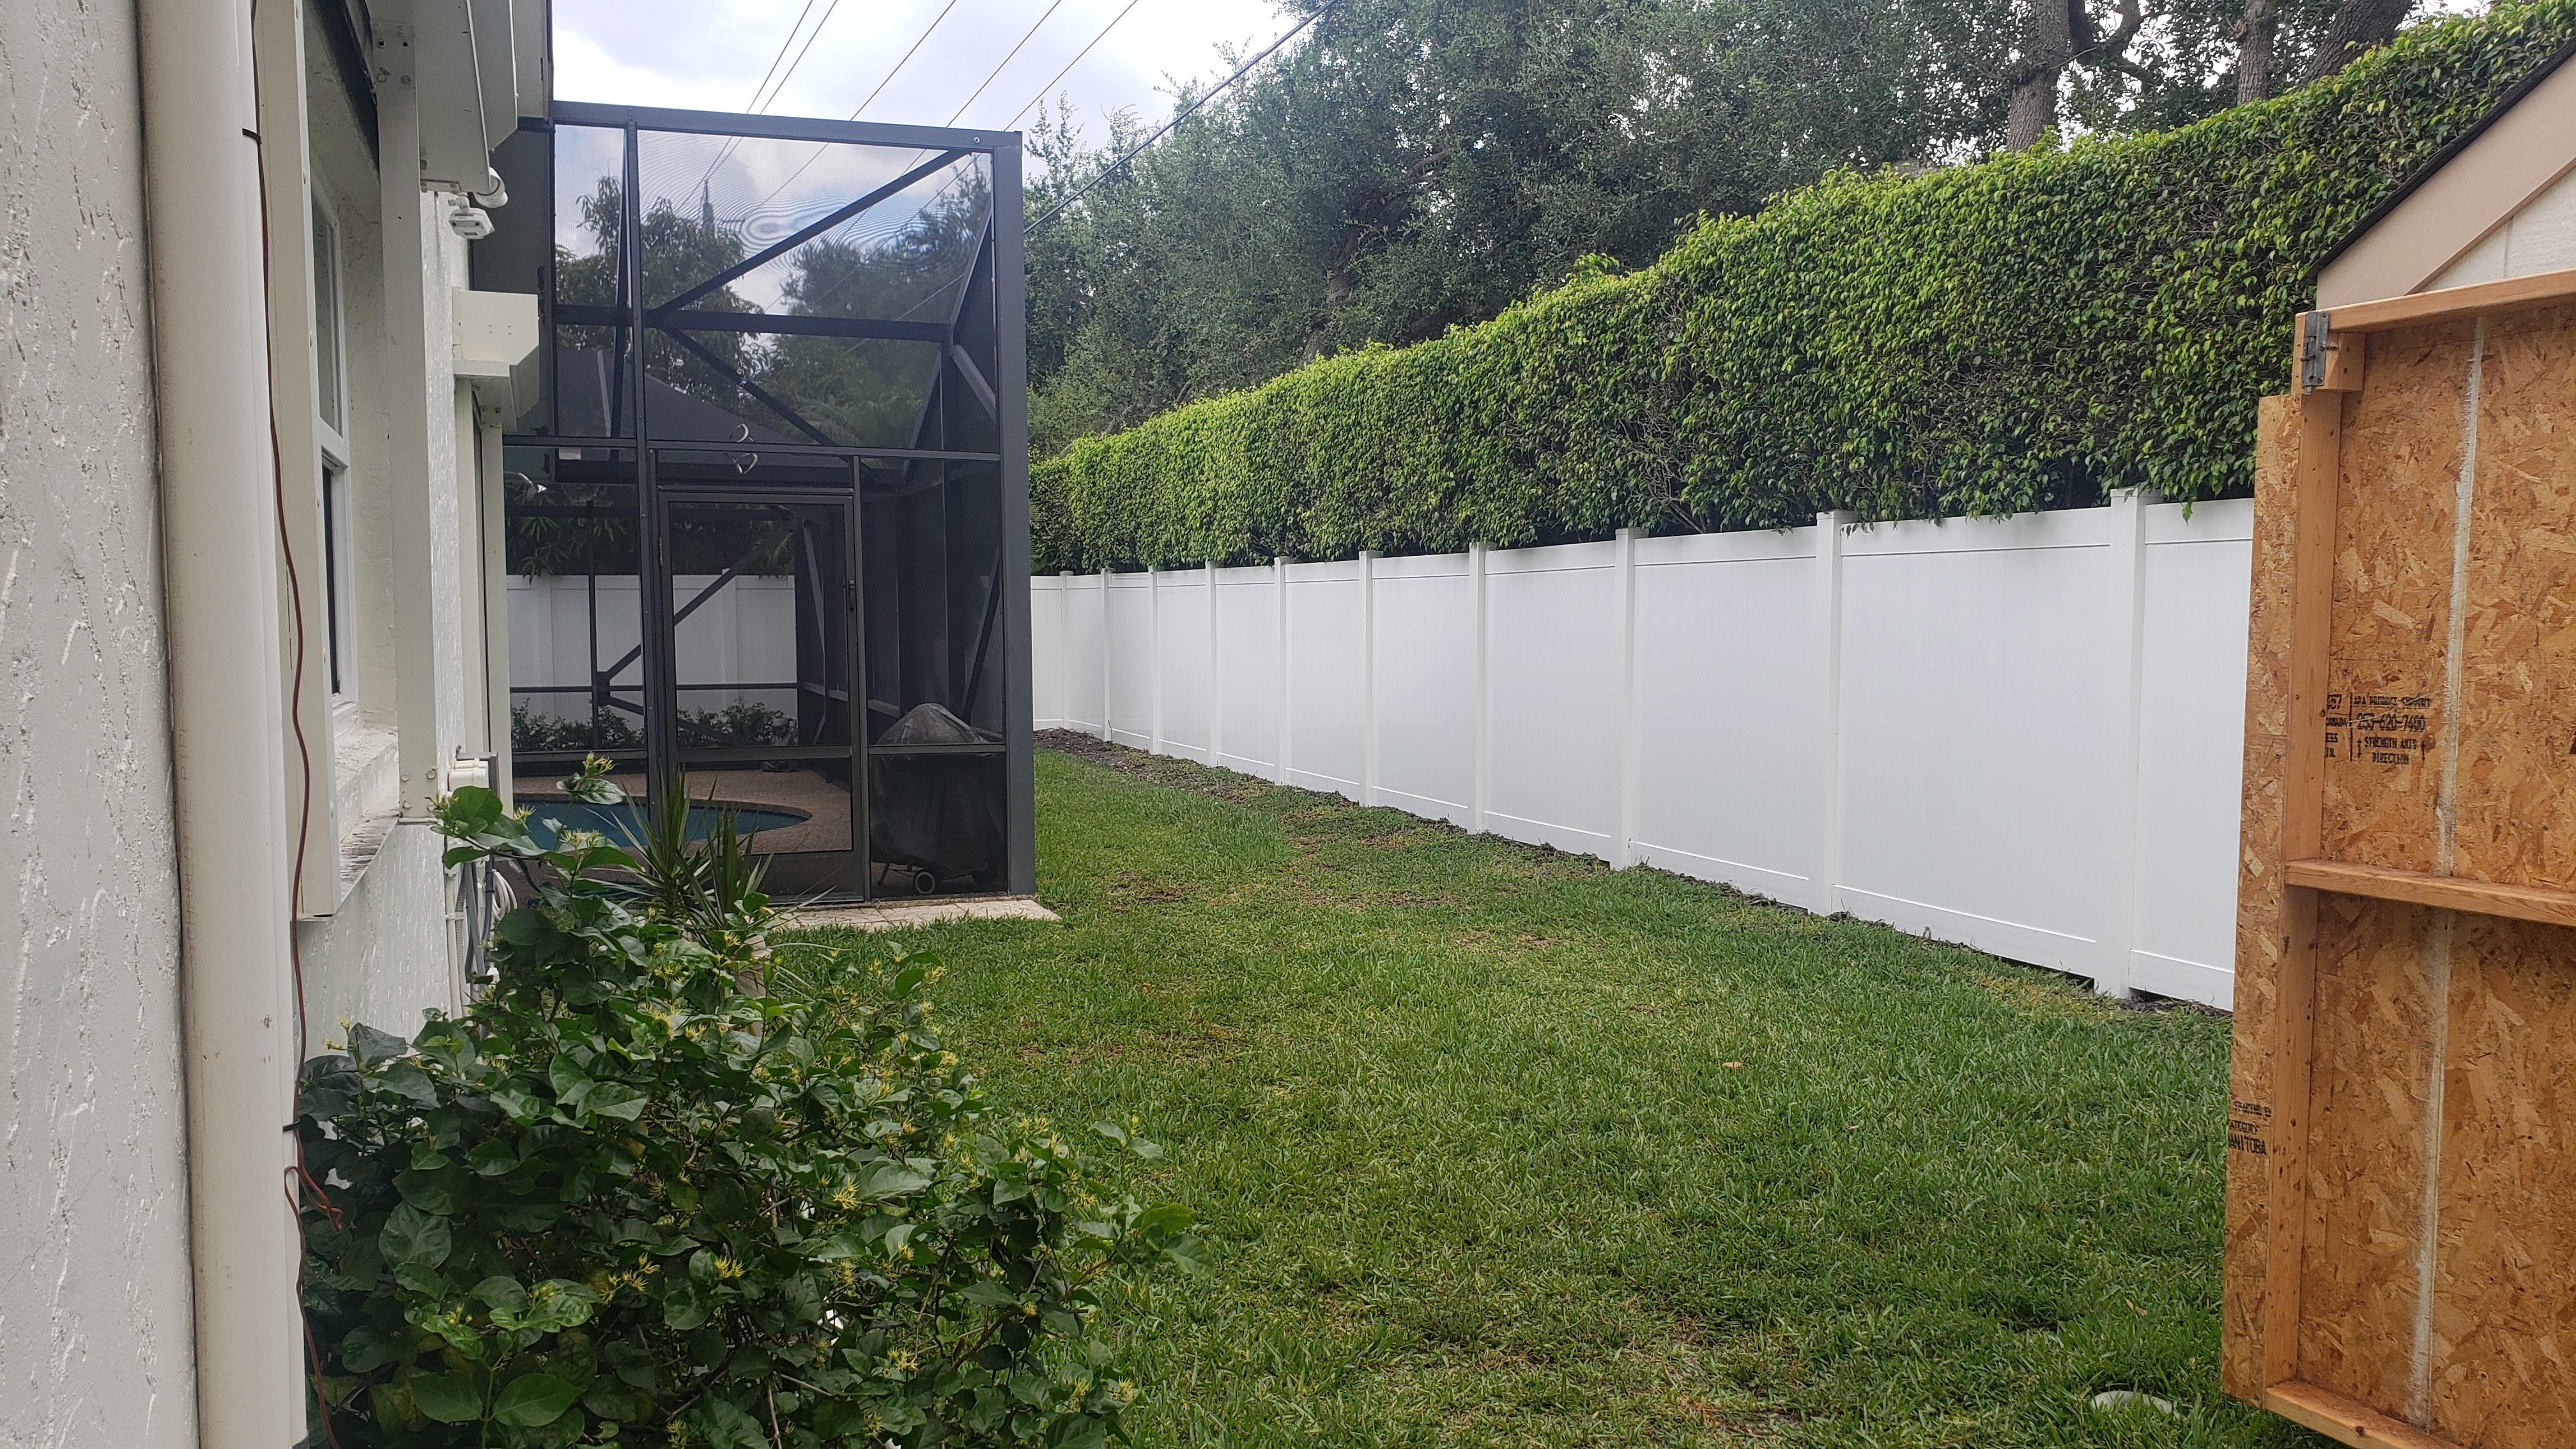 Commercial Fence Contractors in Corpus Christi TX.